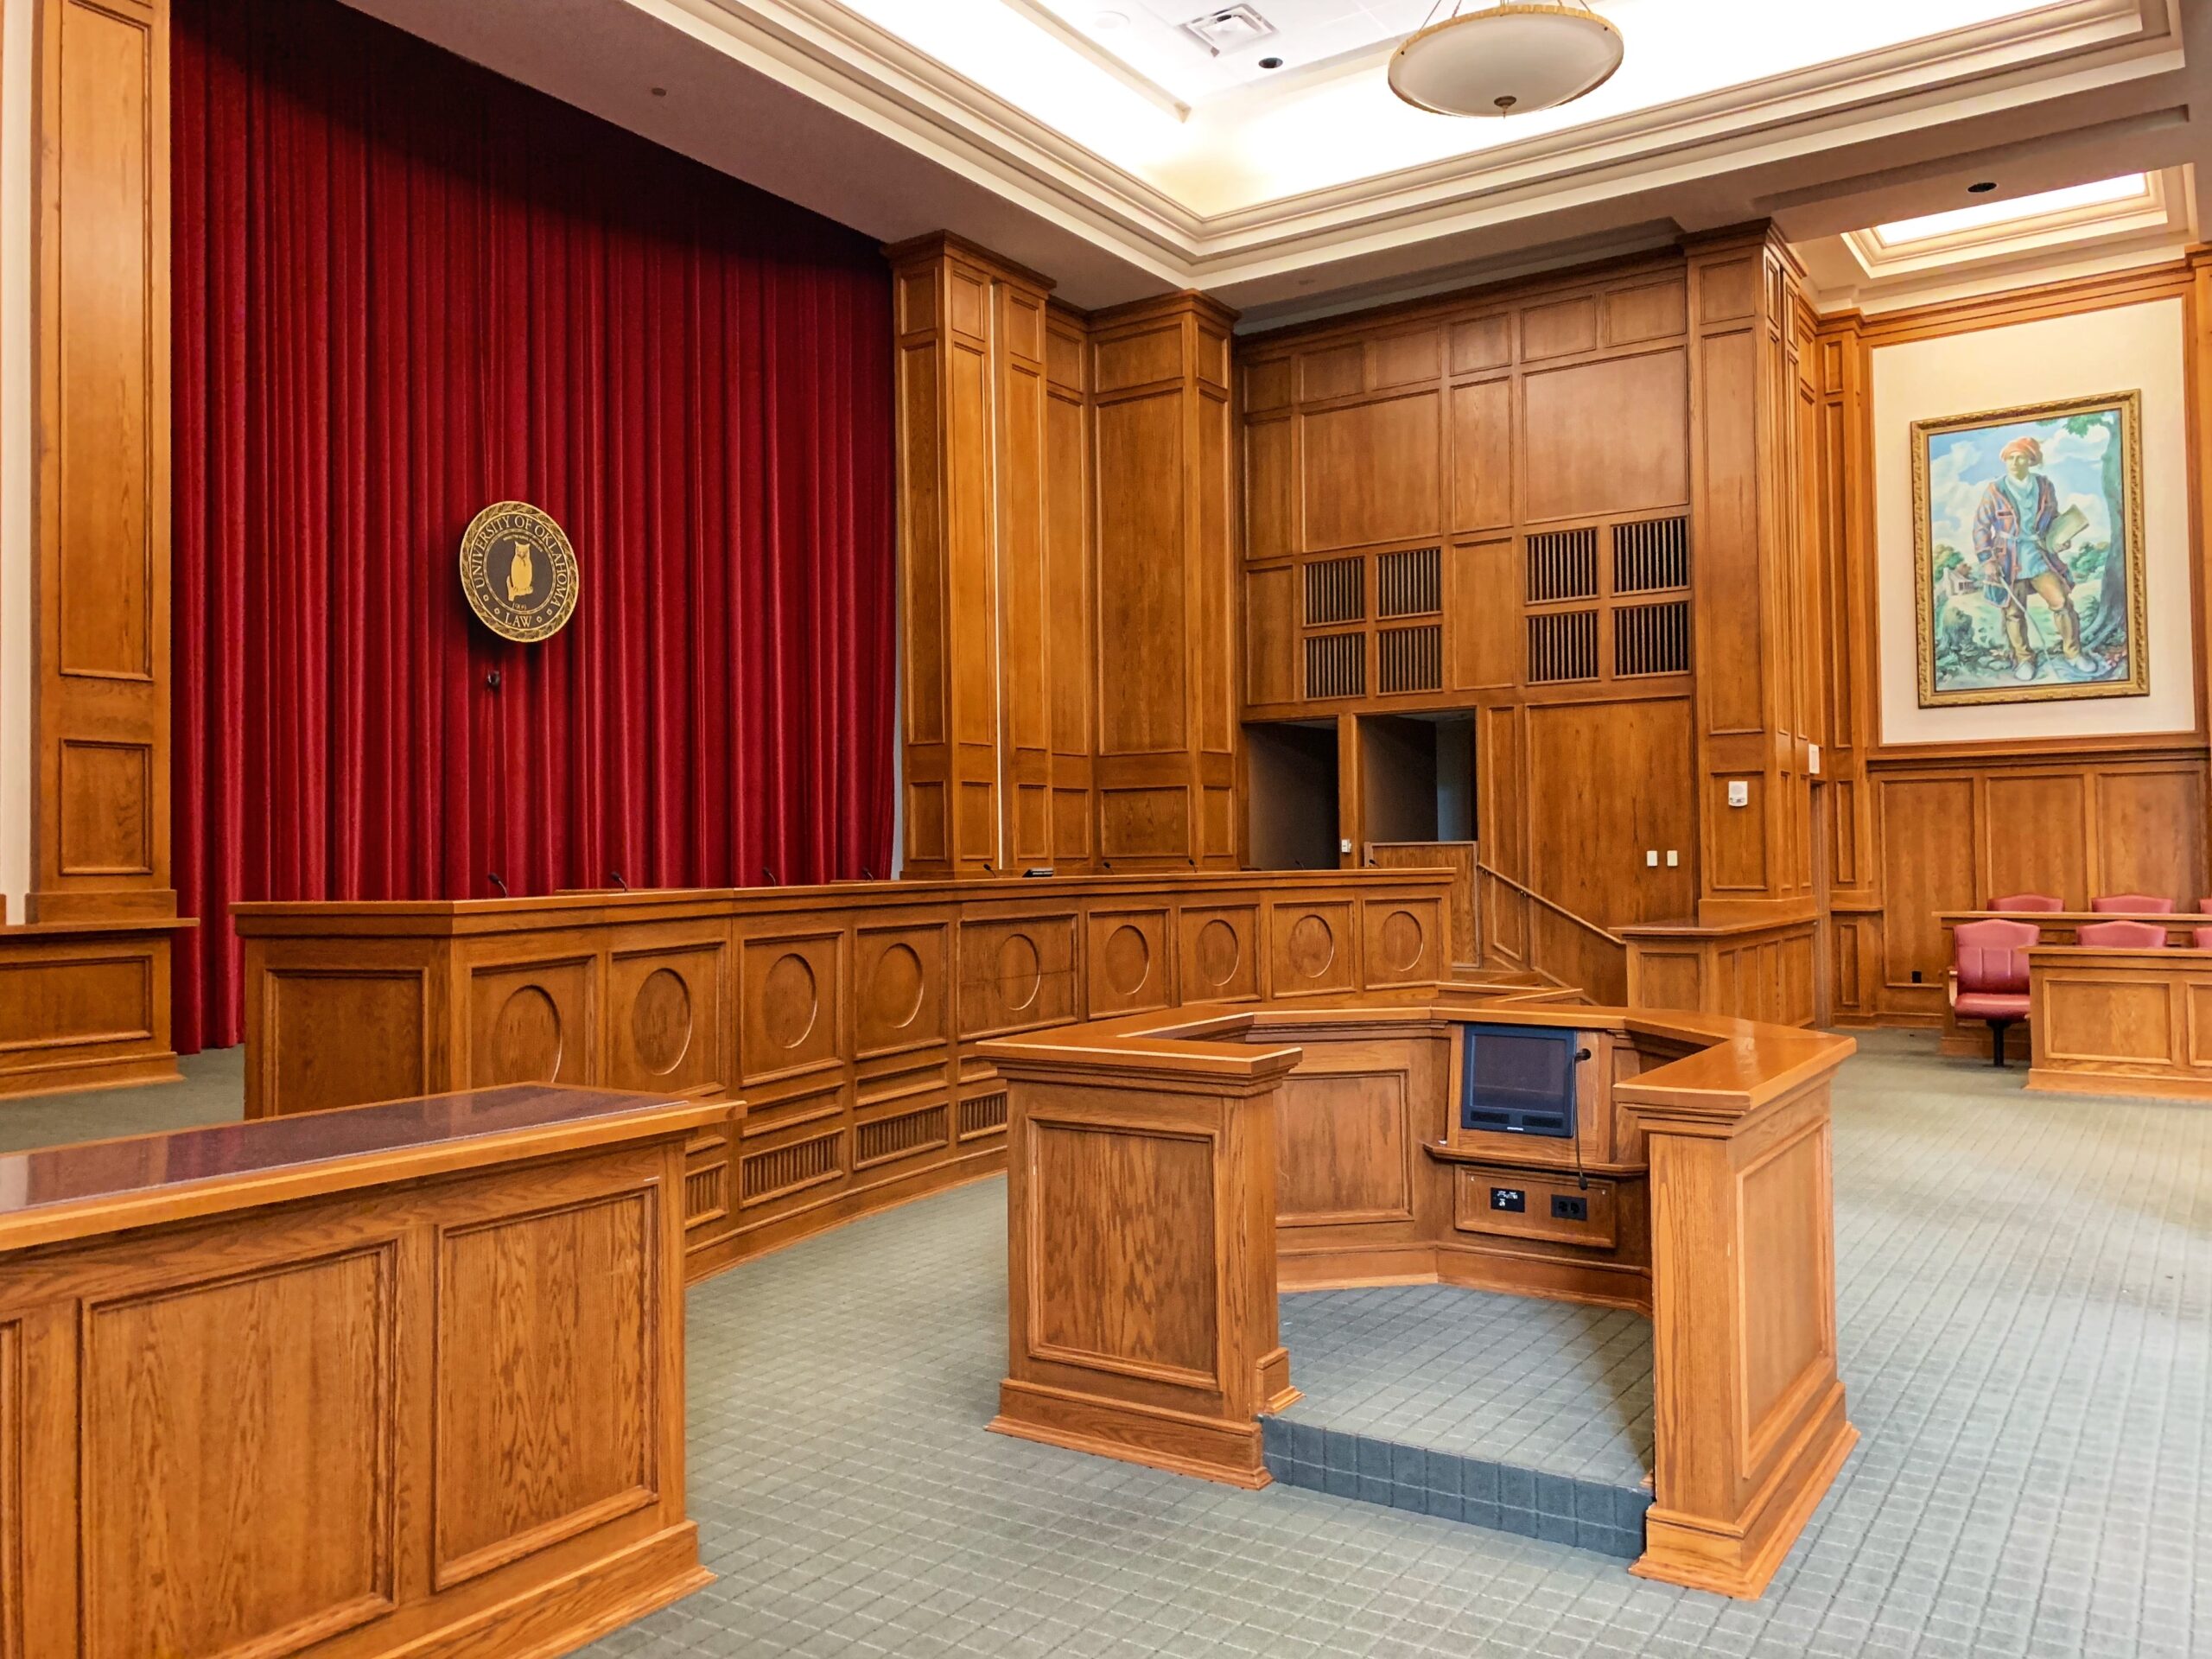 Old Style Courtroom with brown desks and a red backdrop